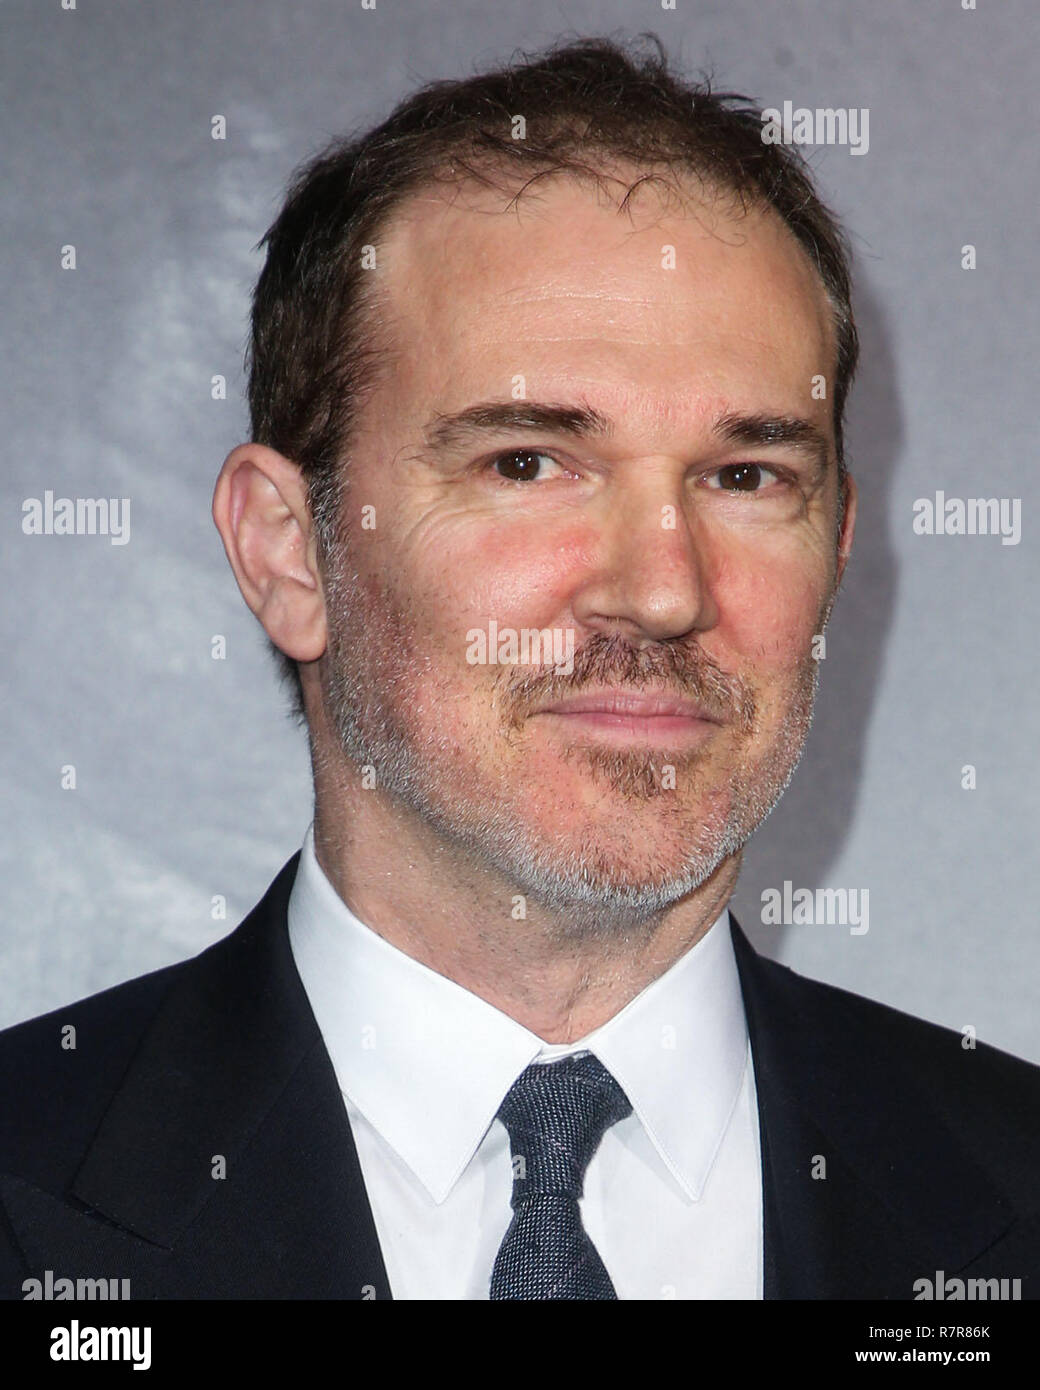 Los Angeles, California, USA. 10th December, 2018. Actor Loren Dean arrives at the Los Angeles Premiere of Warner Bros. Pictures' 'The Mule' held at the Regency Village Theatre on December 10, 2018 in Westwood, Los Angeles, California, United States. (Photo by Image Press Agency) Credit: Image Press Agency/Alamy Live News Stock Photo